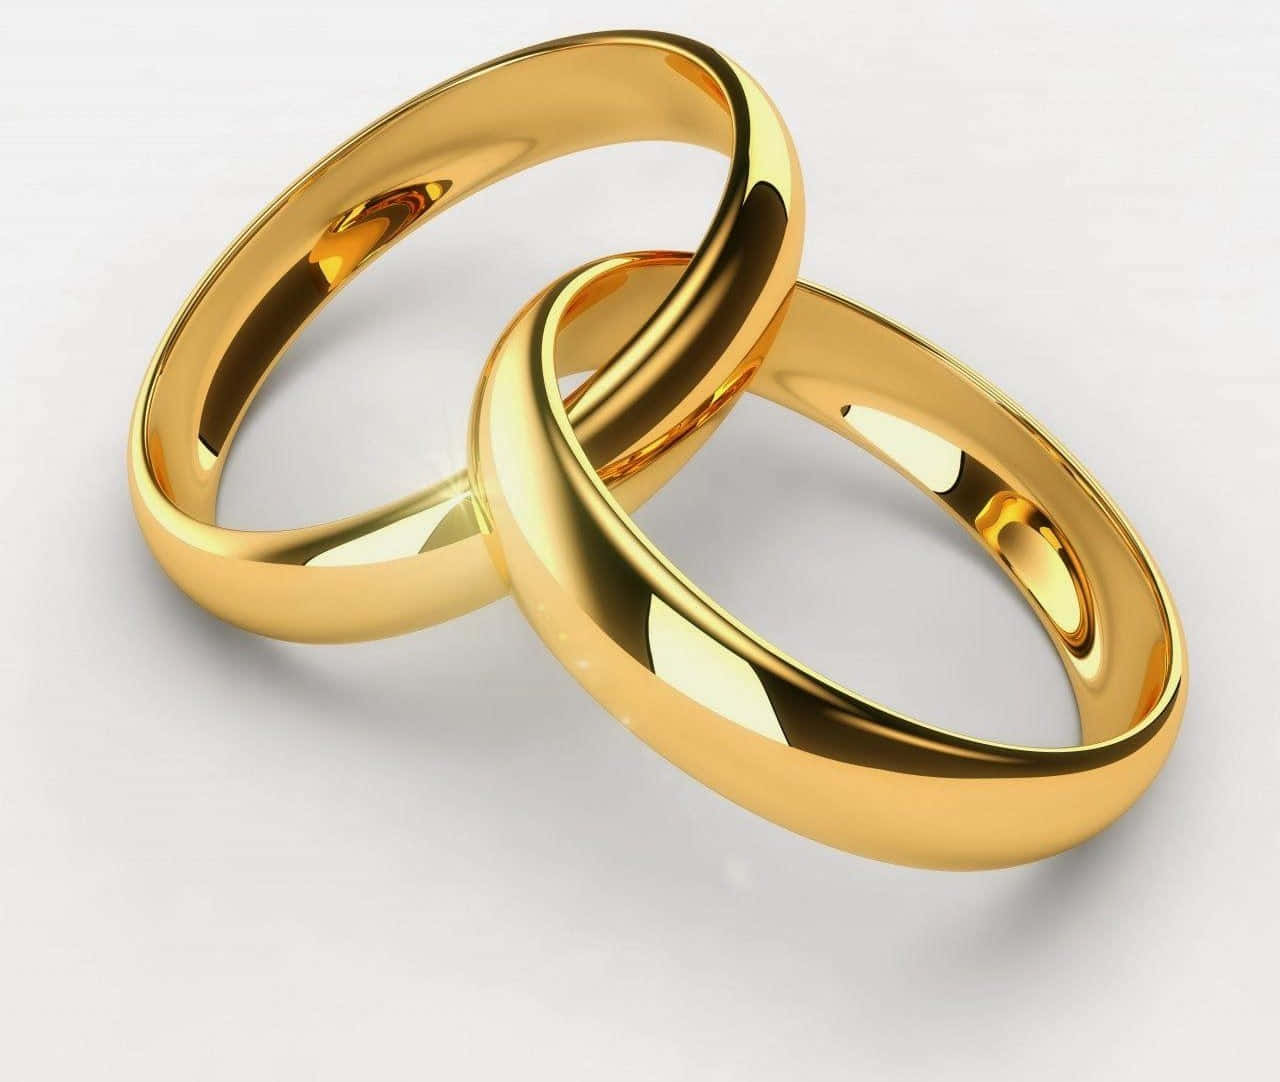 Golden Wedding Ring Picture